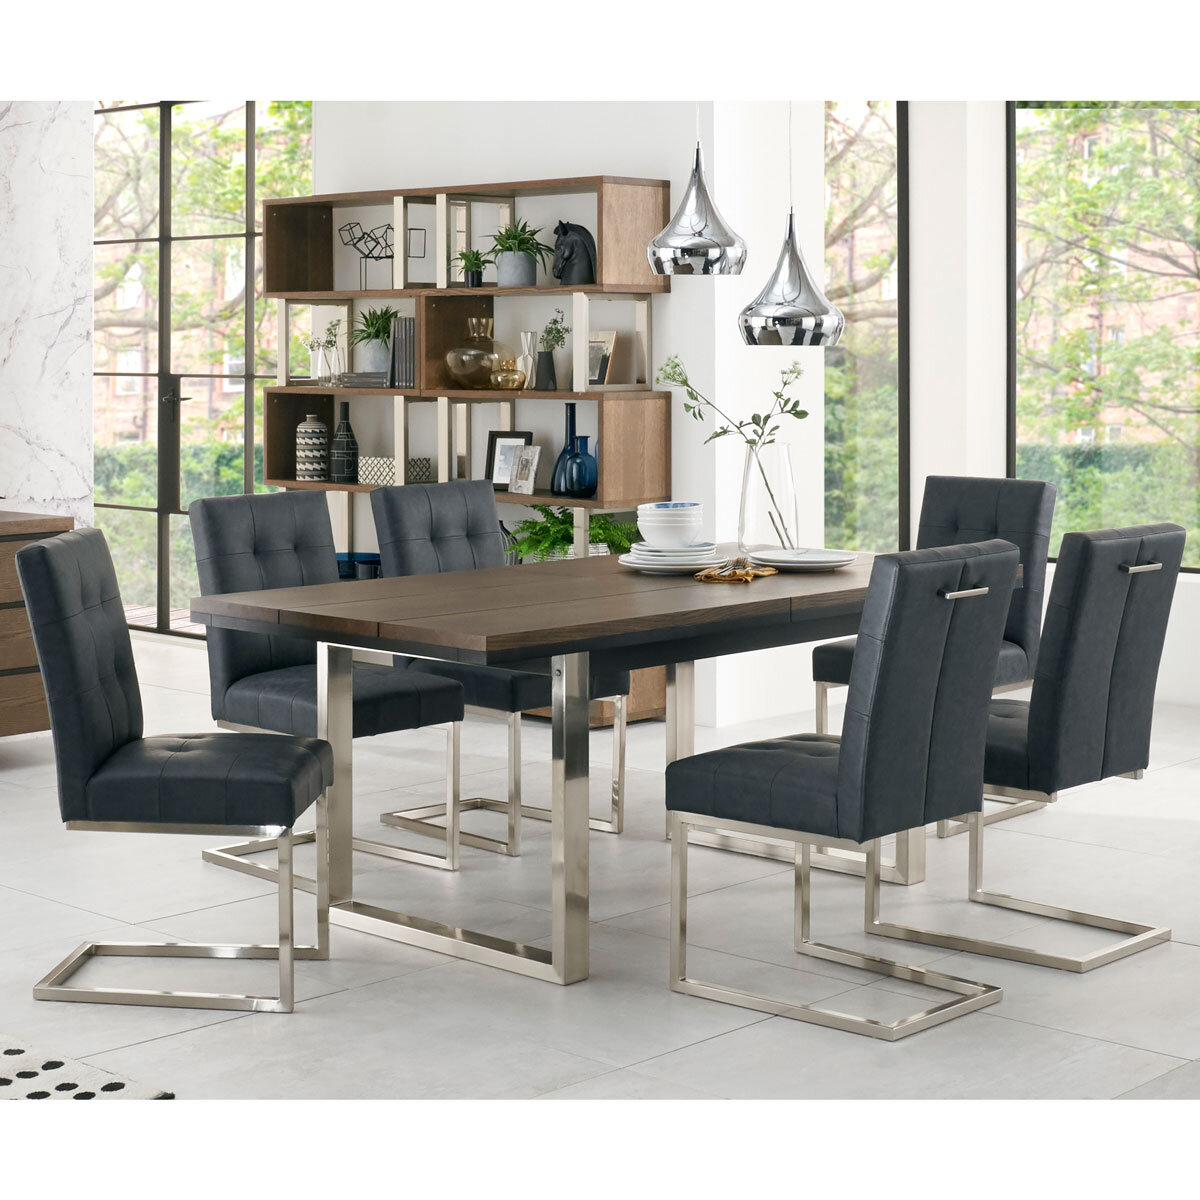 Bentley Designs Tivoli Dark Oak Dining Table + 6 Black Leather Cantilever Dining Chairs